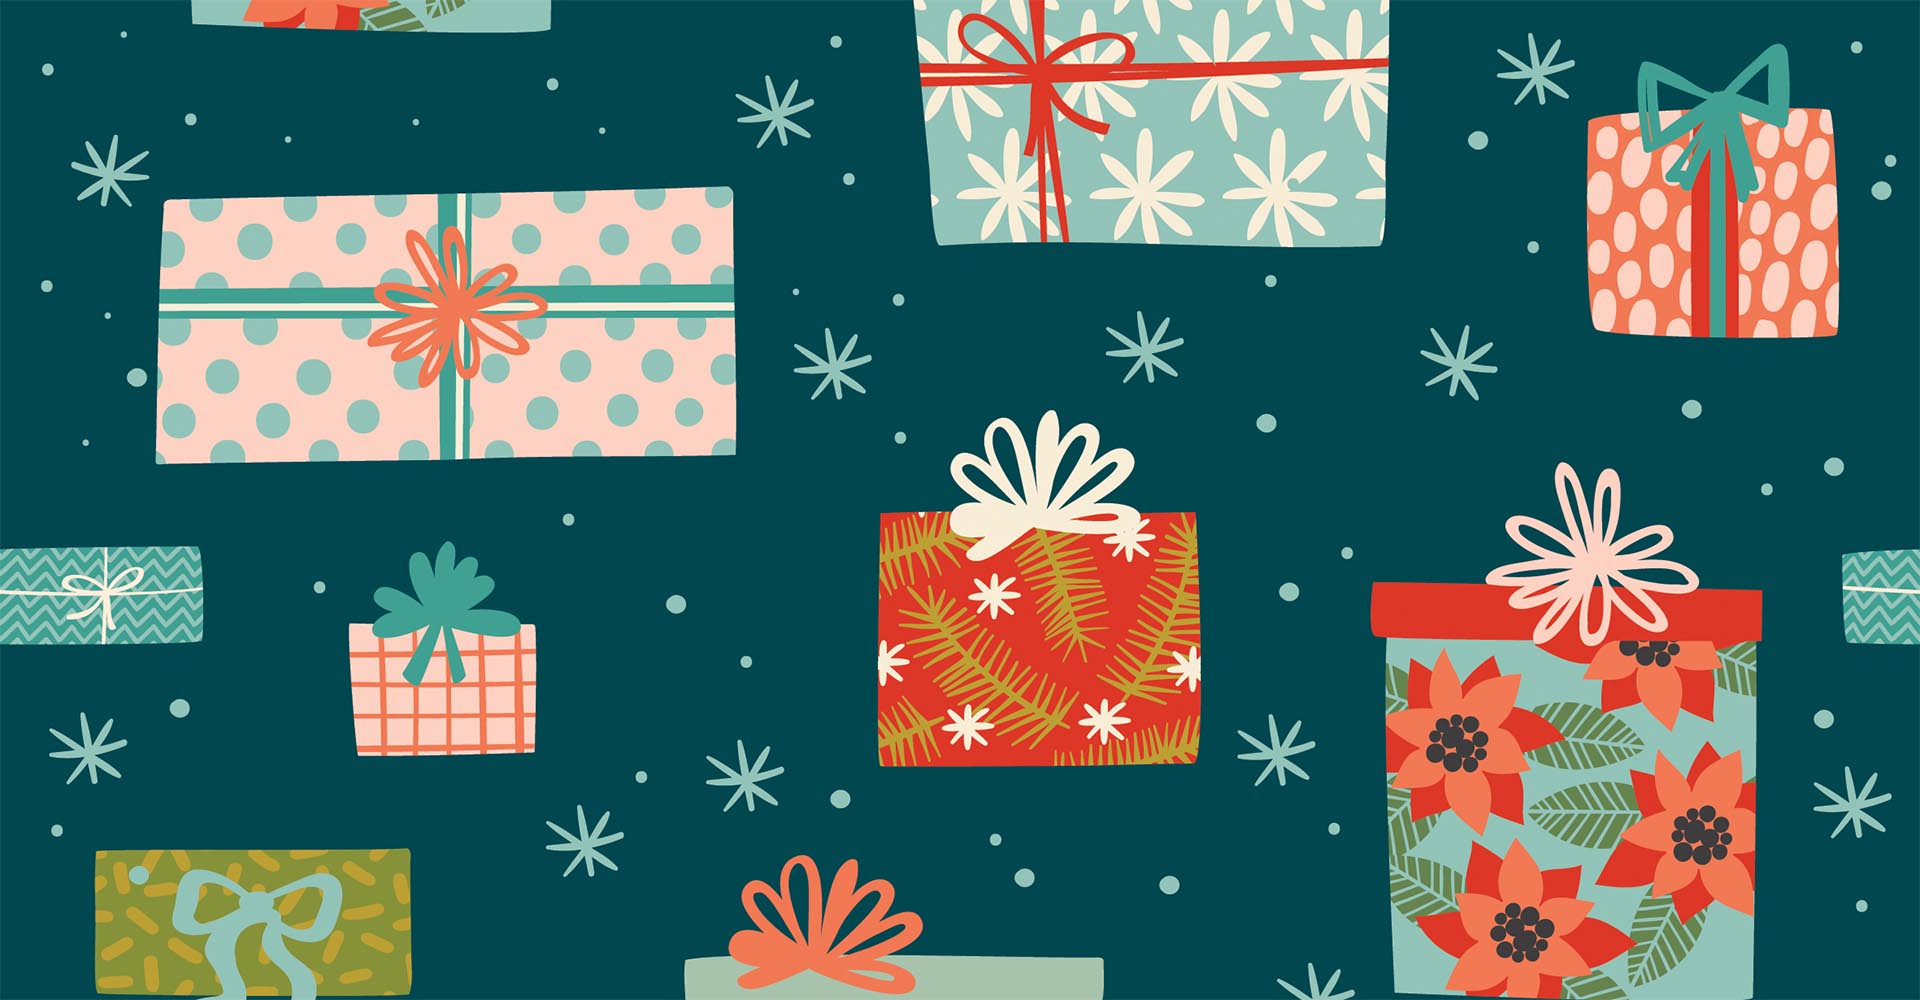 Shop at small businesses to make your holiday spending more meaningful